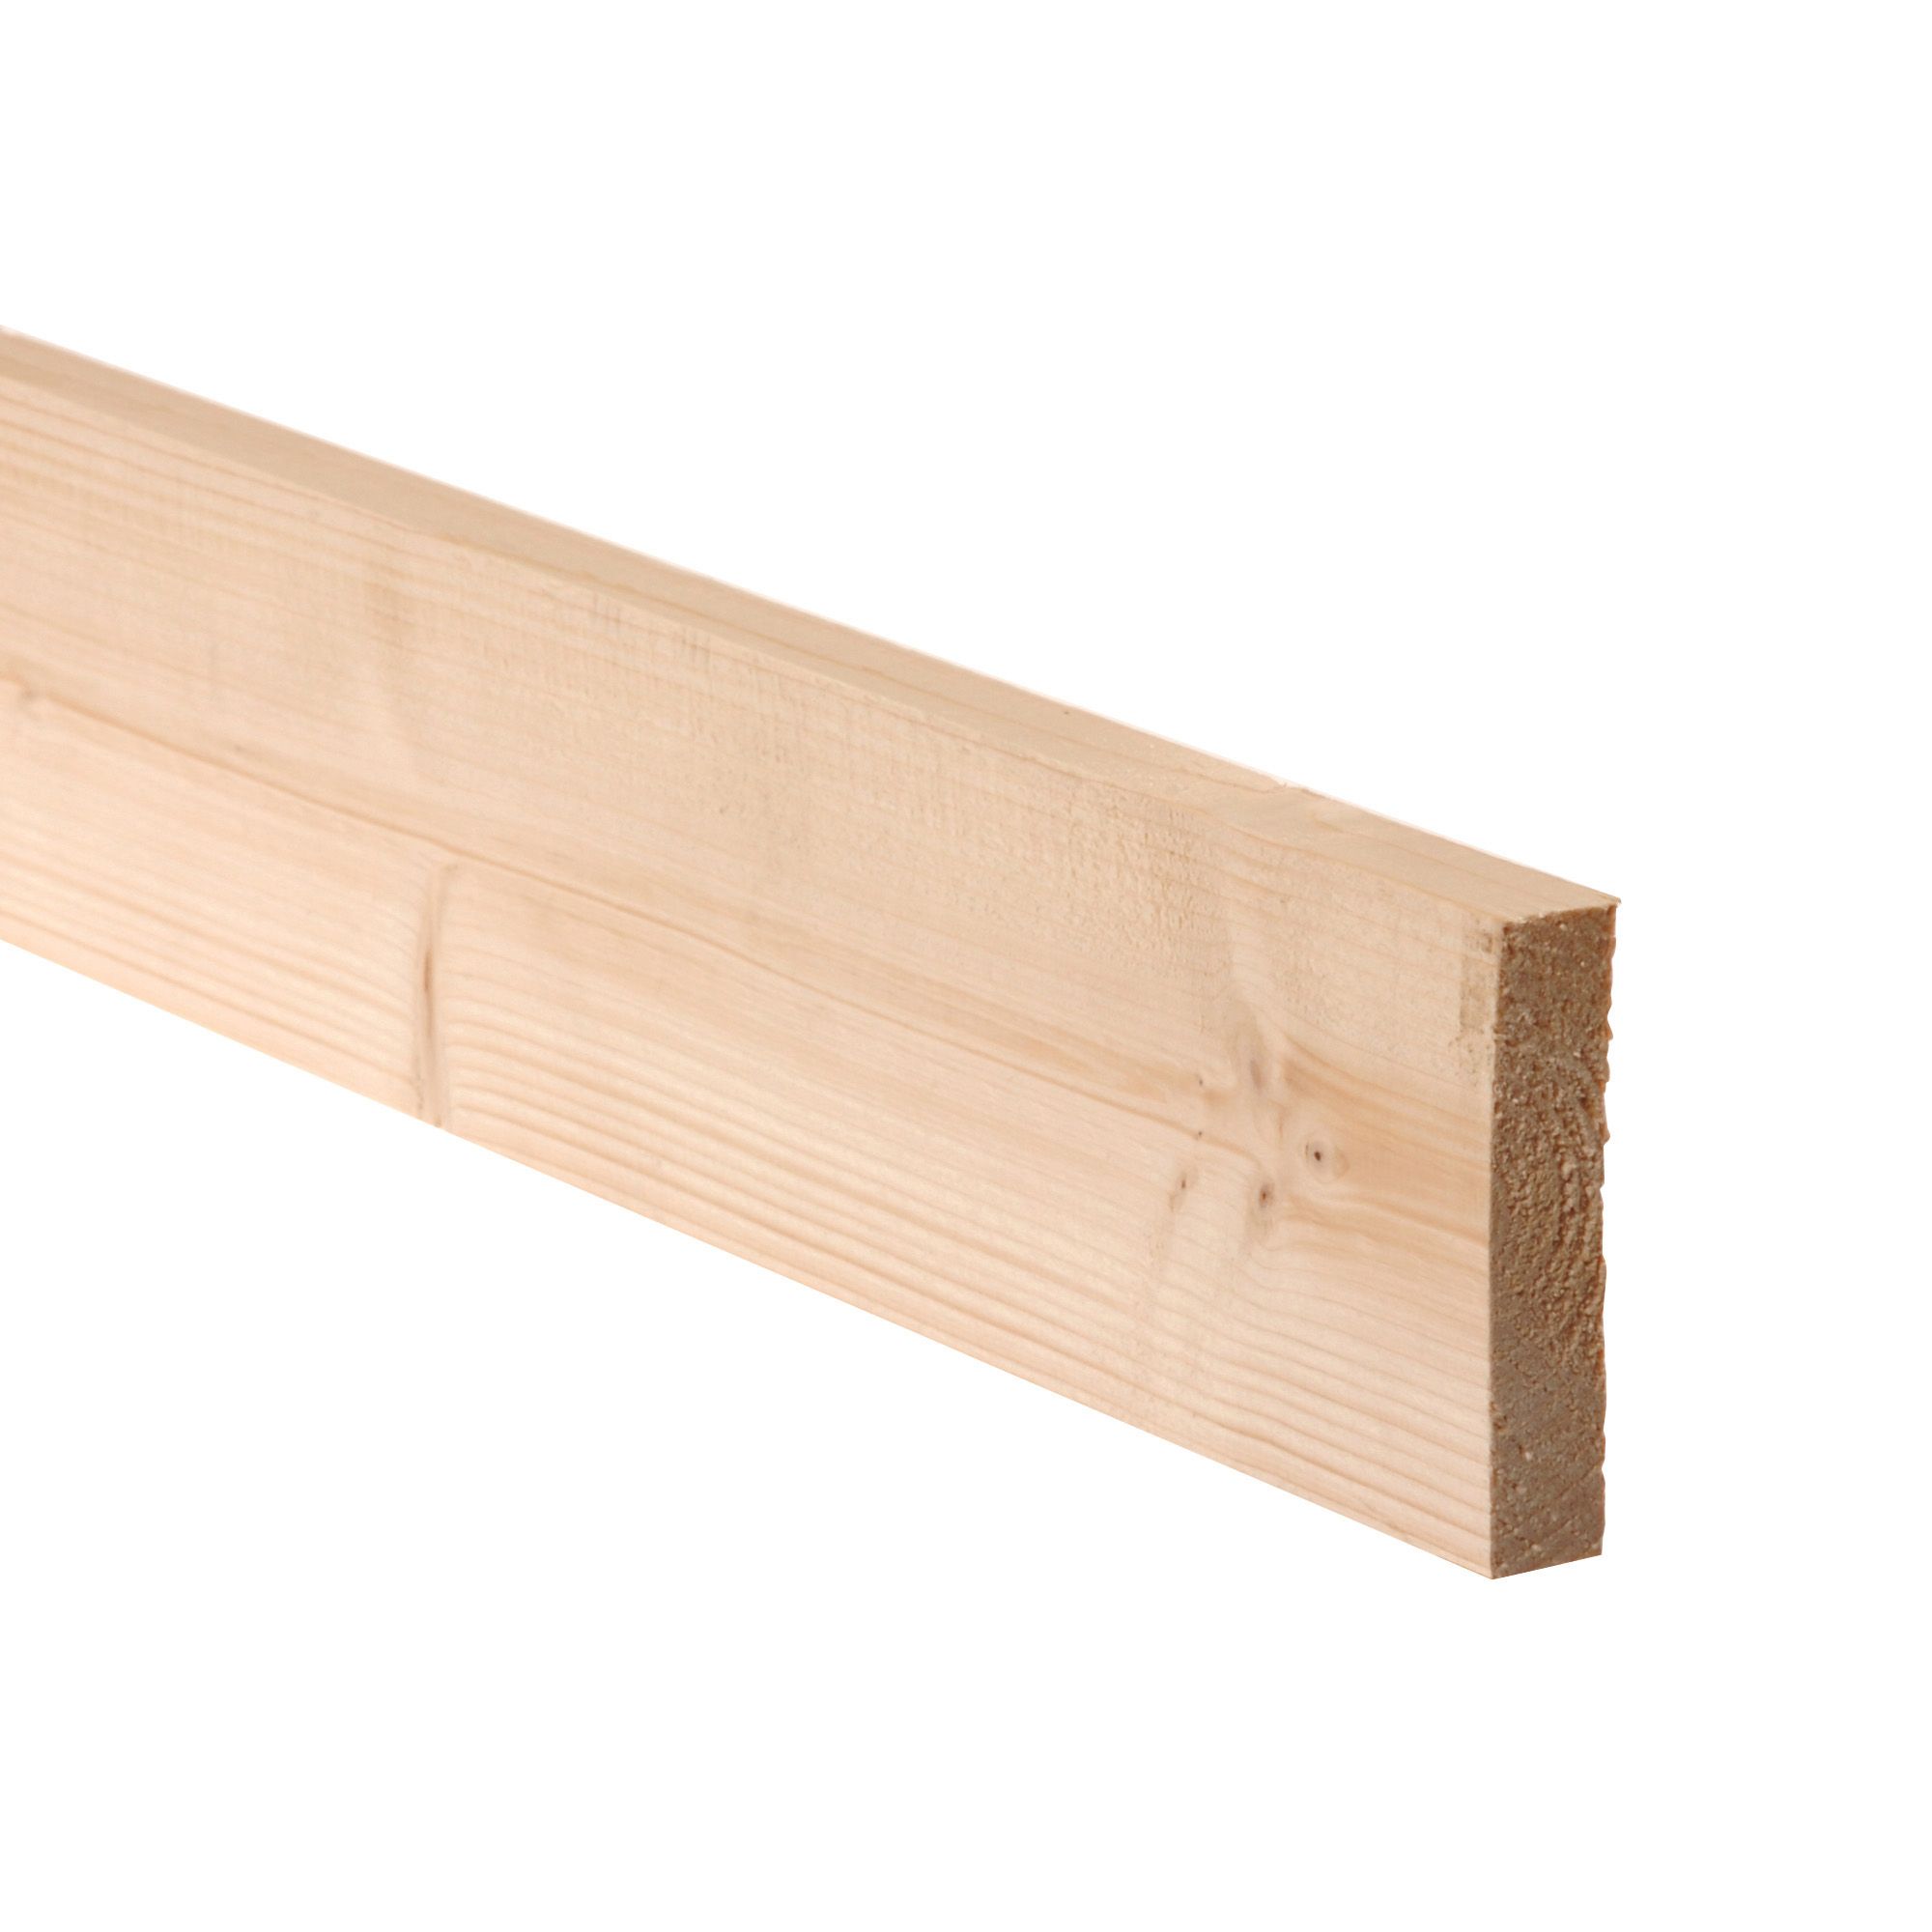 Smooth Planed square edge Spruce Stick timber (L)2.1m (W)126mm (T)28mm 253258, Pack of 6